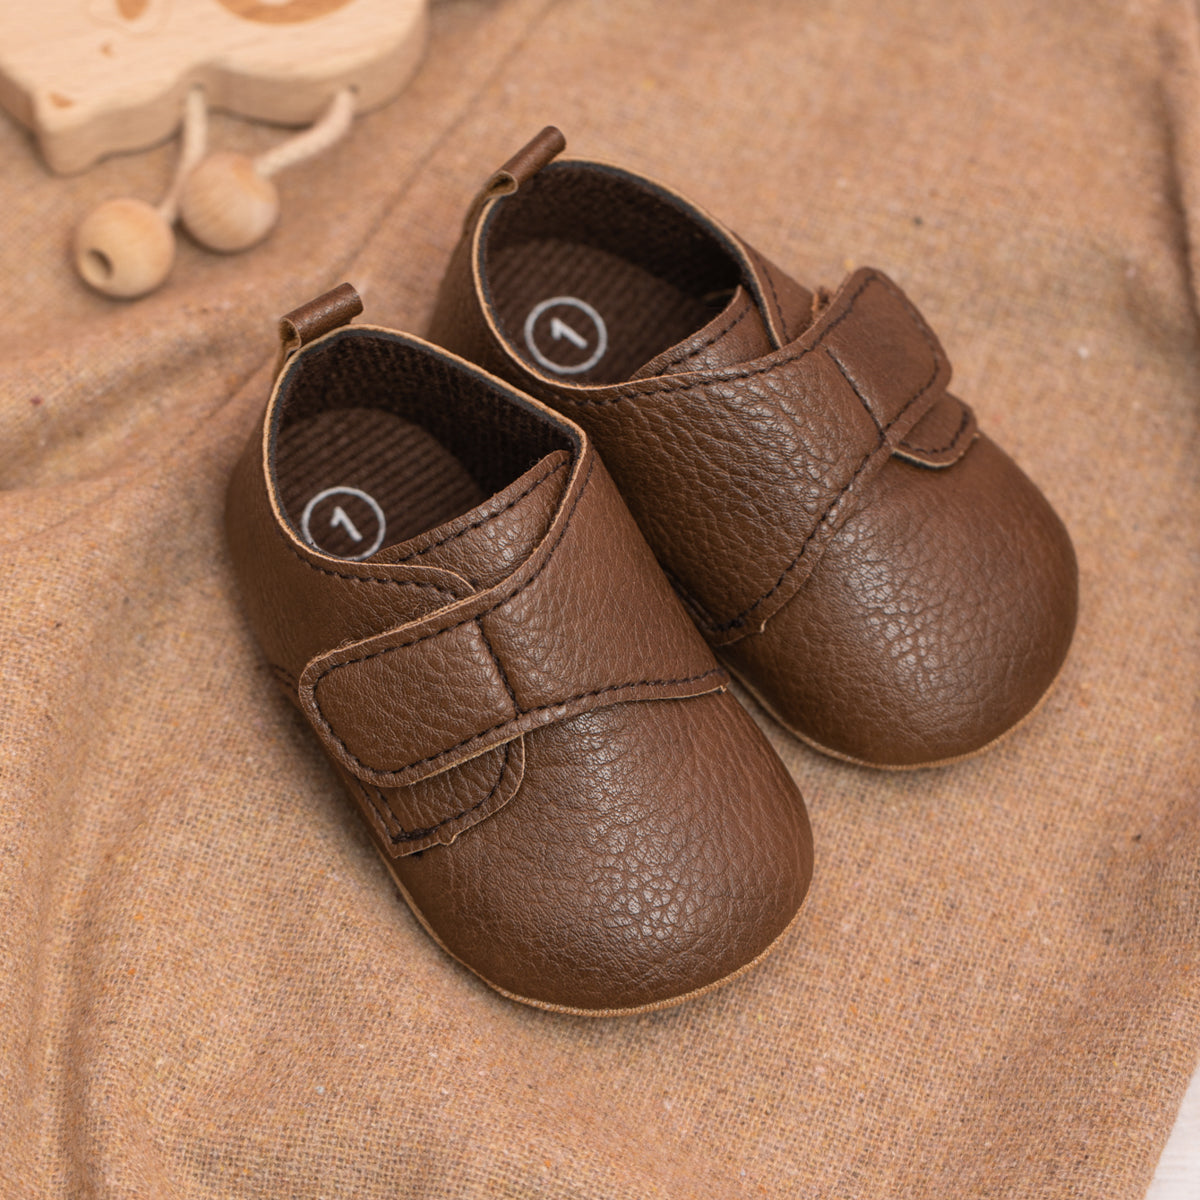 Finley Soft Sole Shoes - Brown